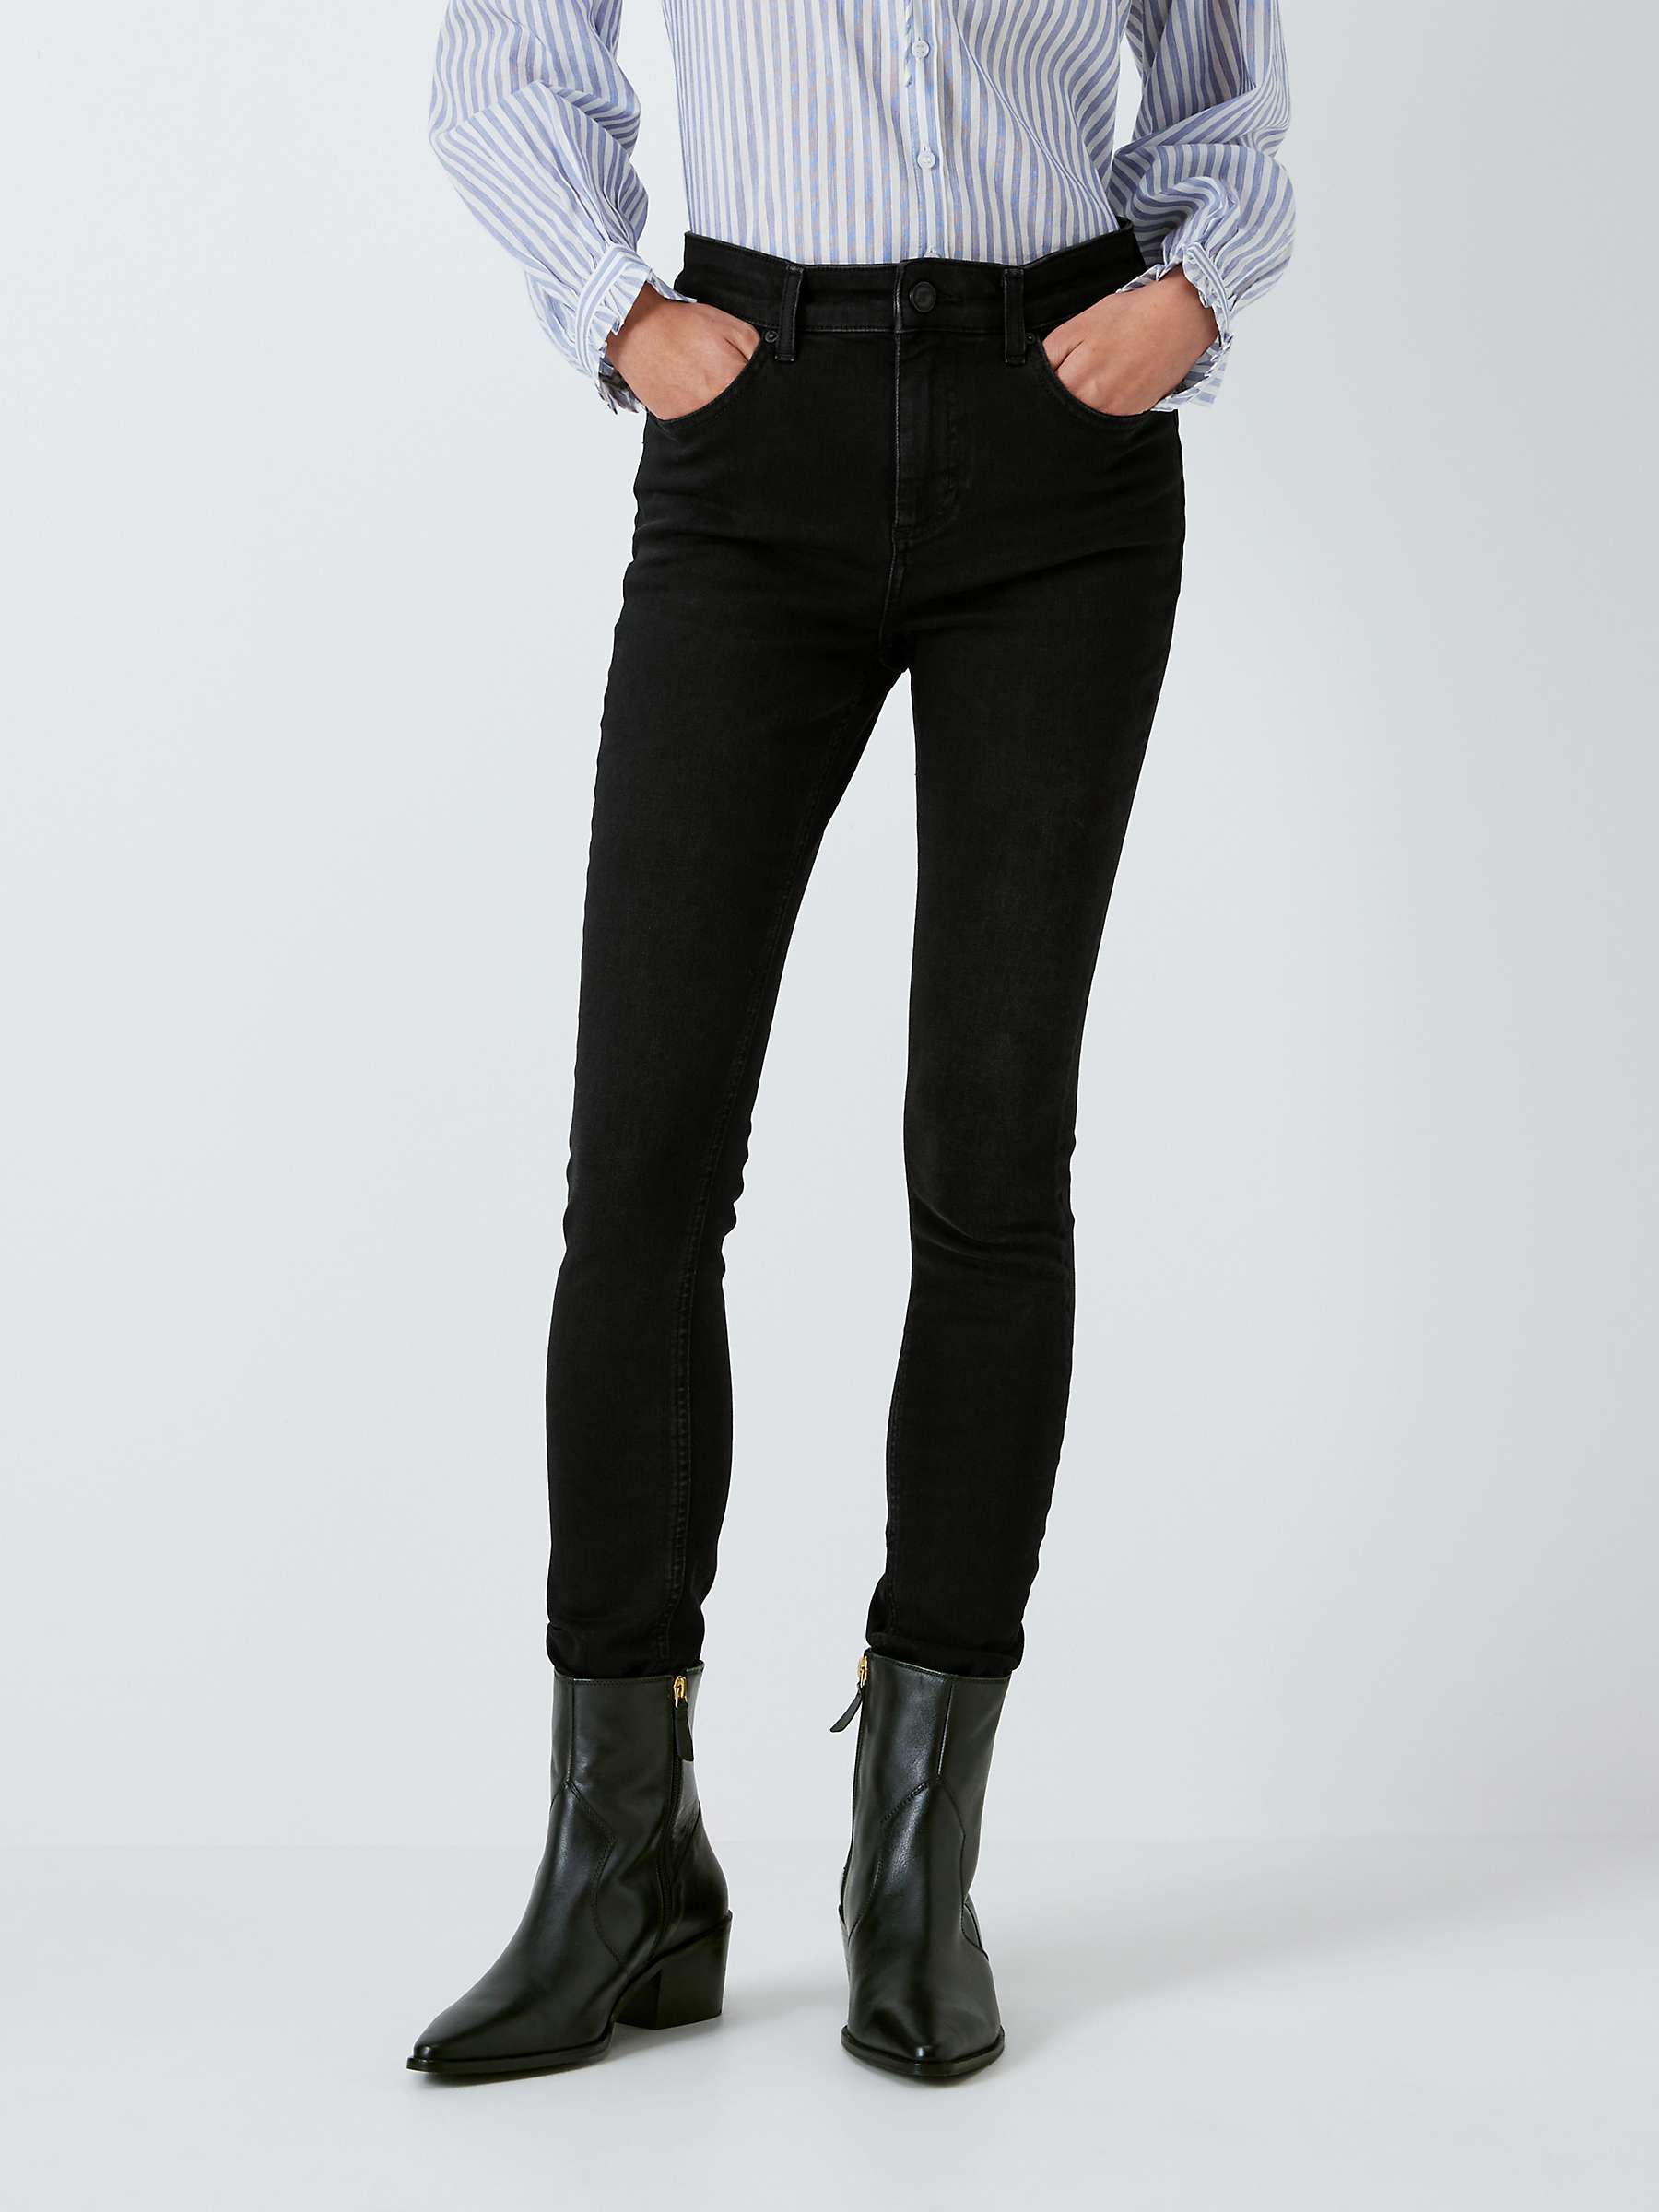 Buy AND/OR Abbot Kinney Skinny Jeans, Washed Black Online at johnlewis.com